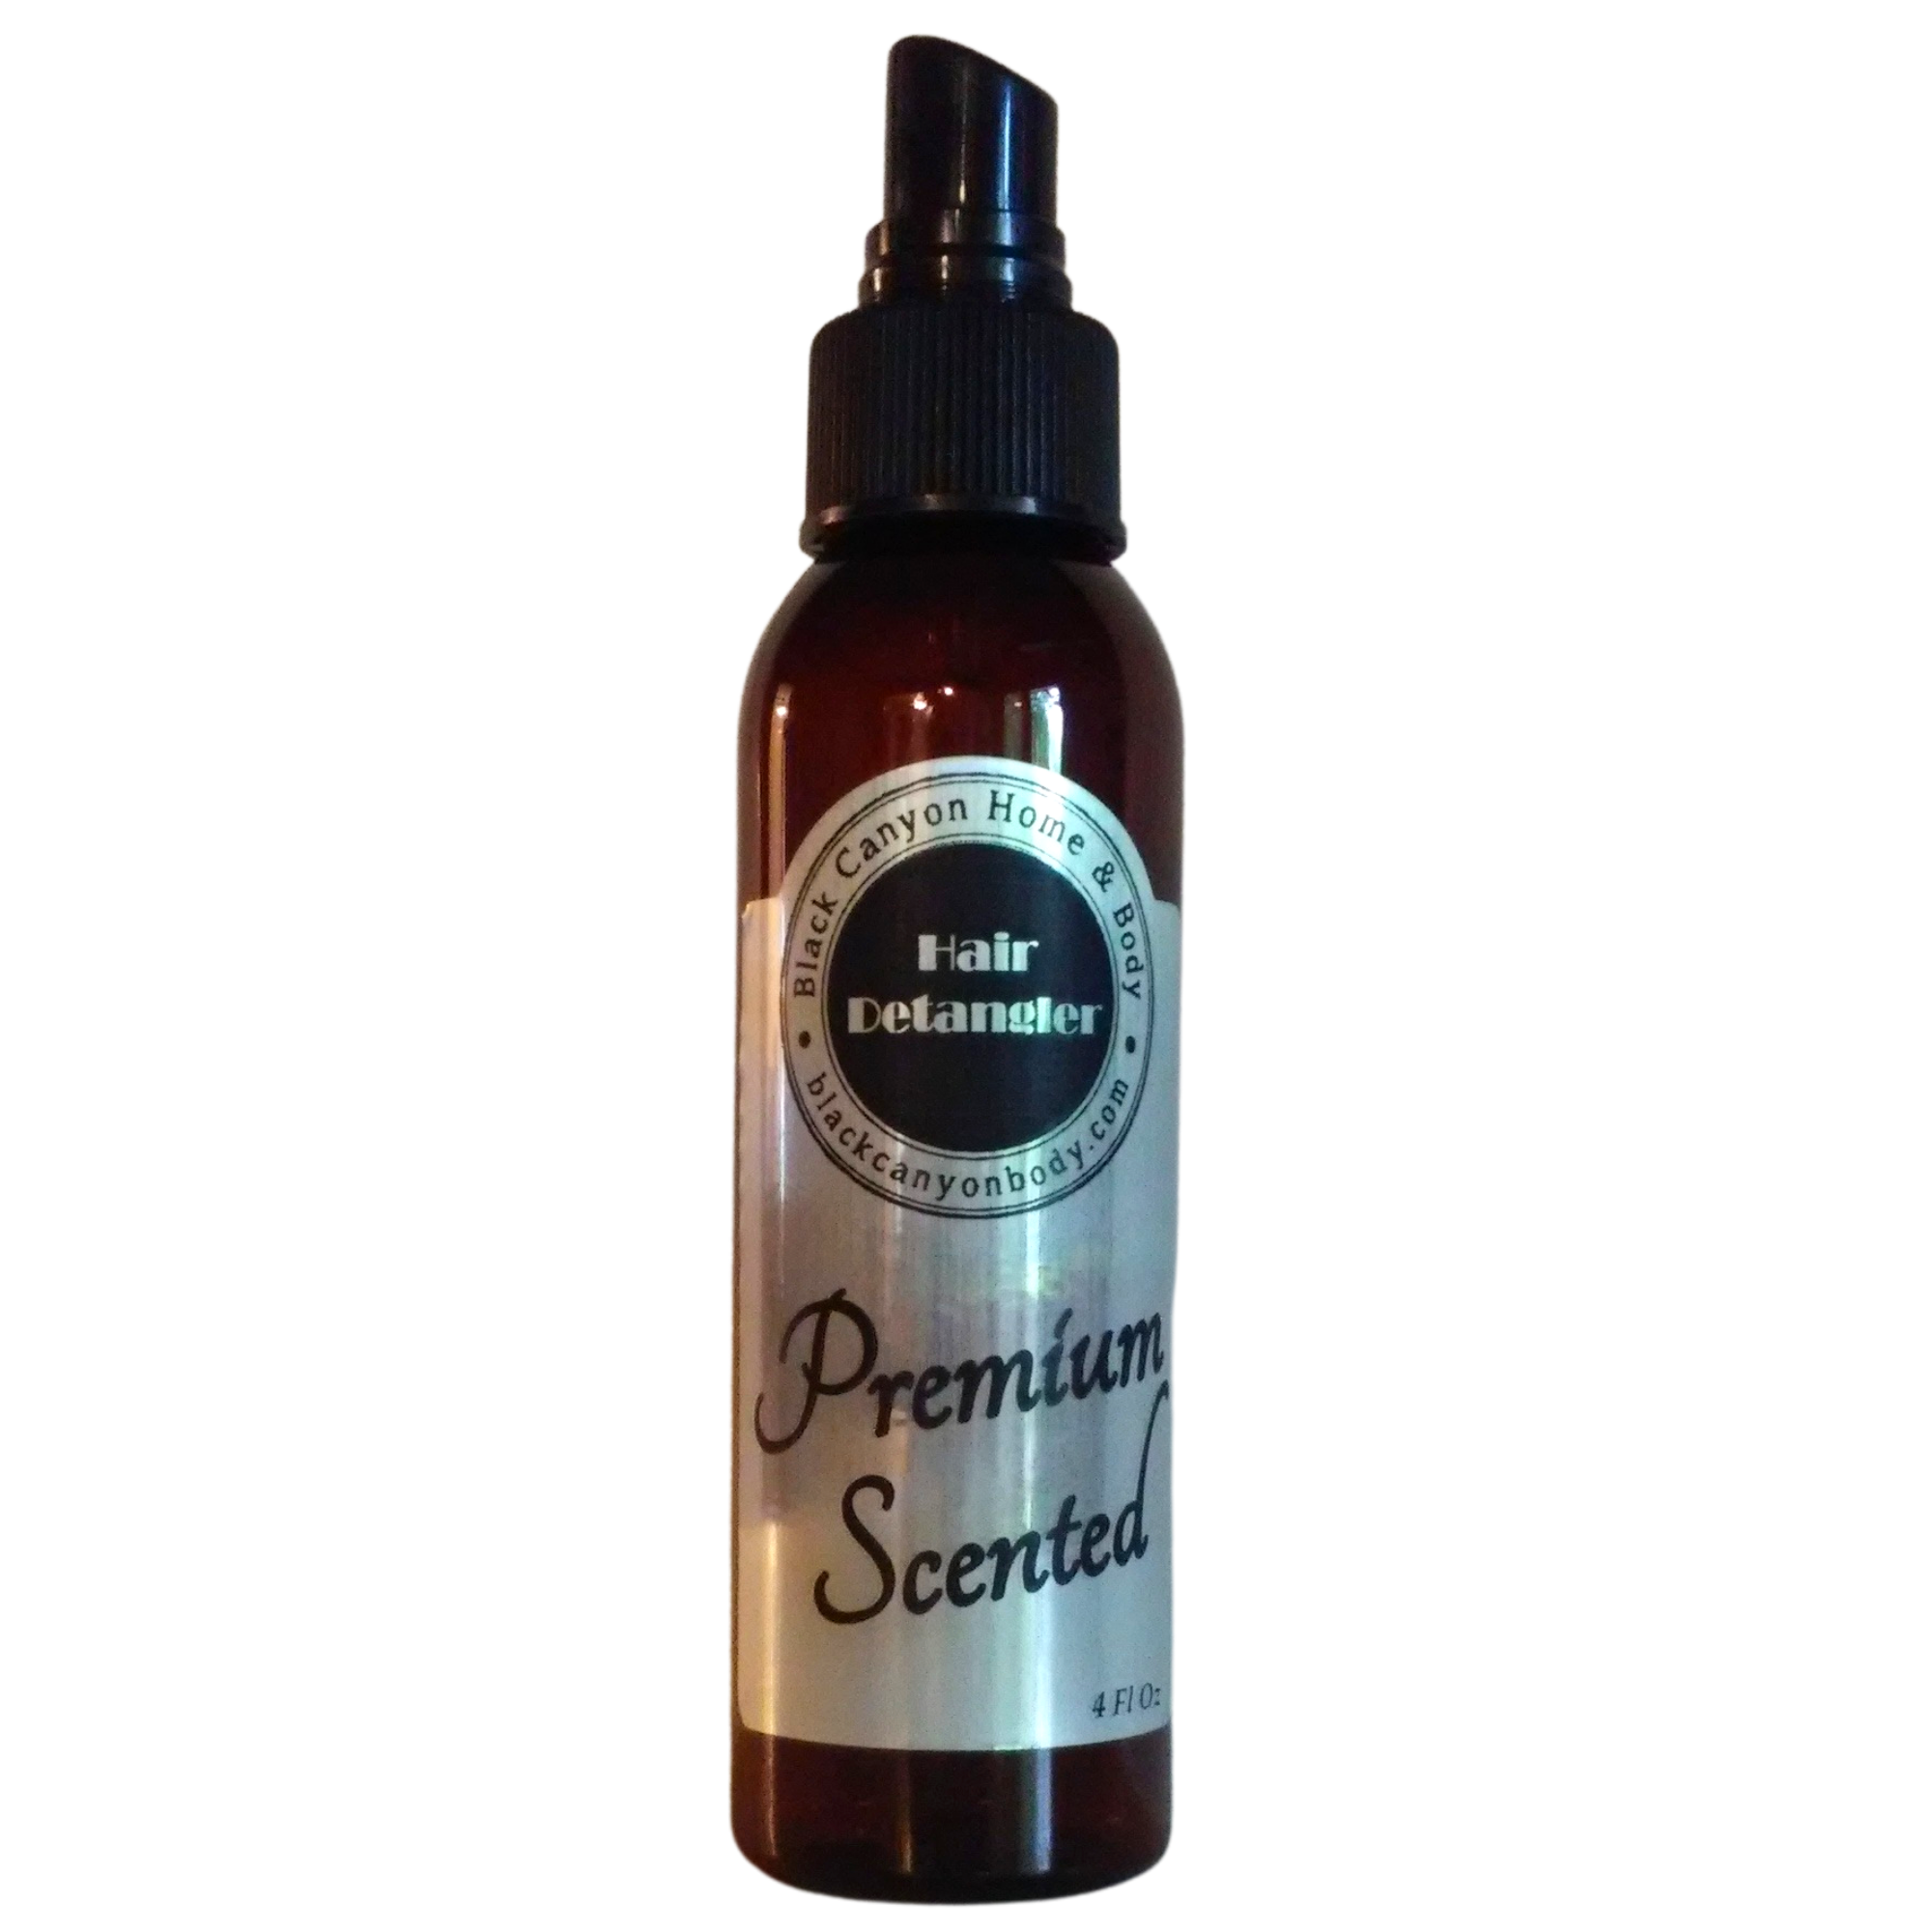 Black Canyon Grapefruit & Quince Scented Hair Detangler Spray with Olive Oil